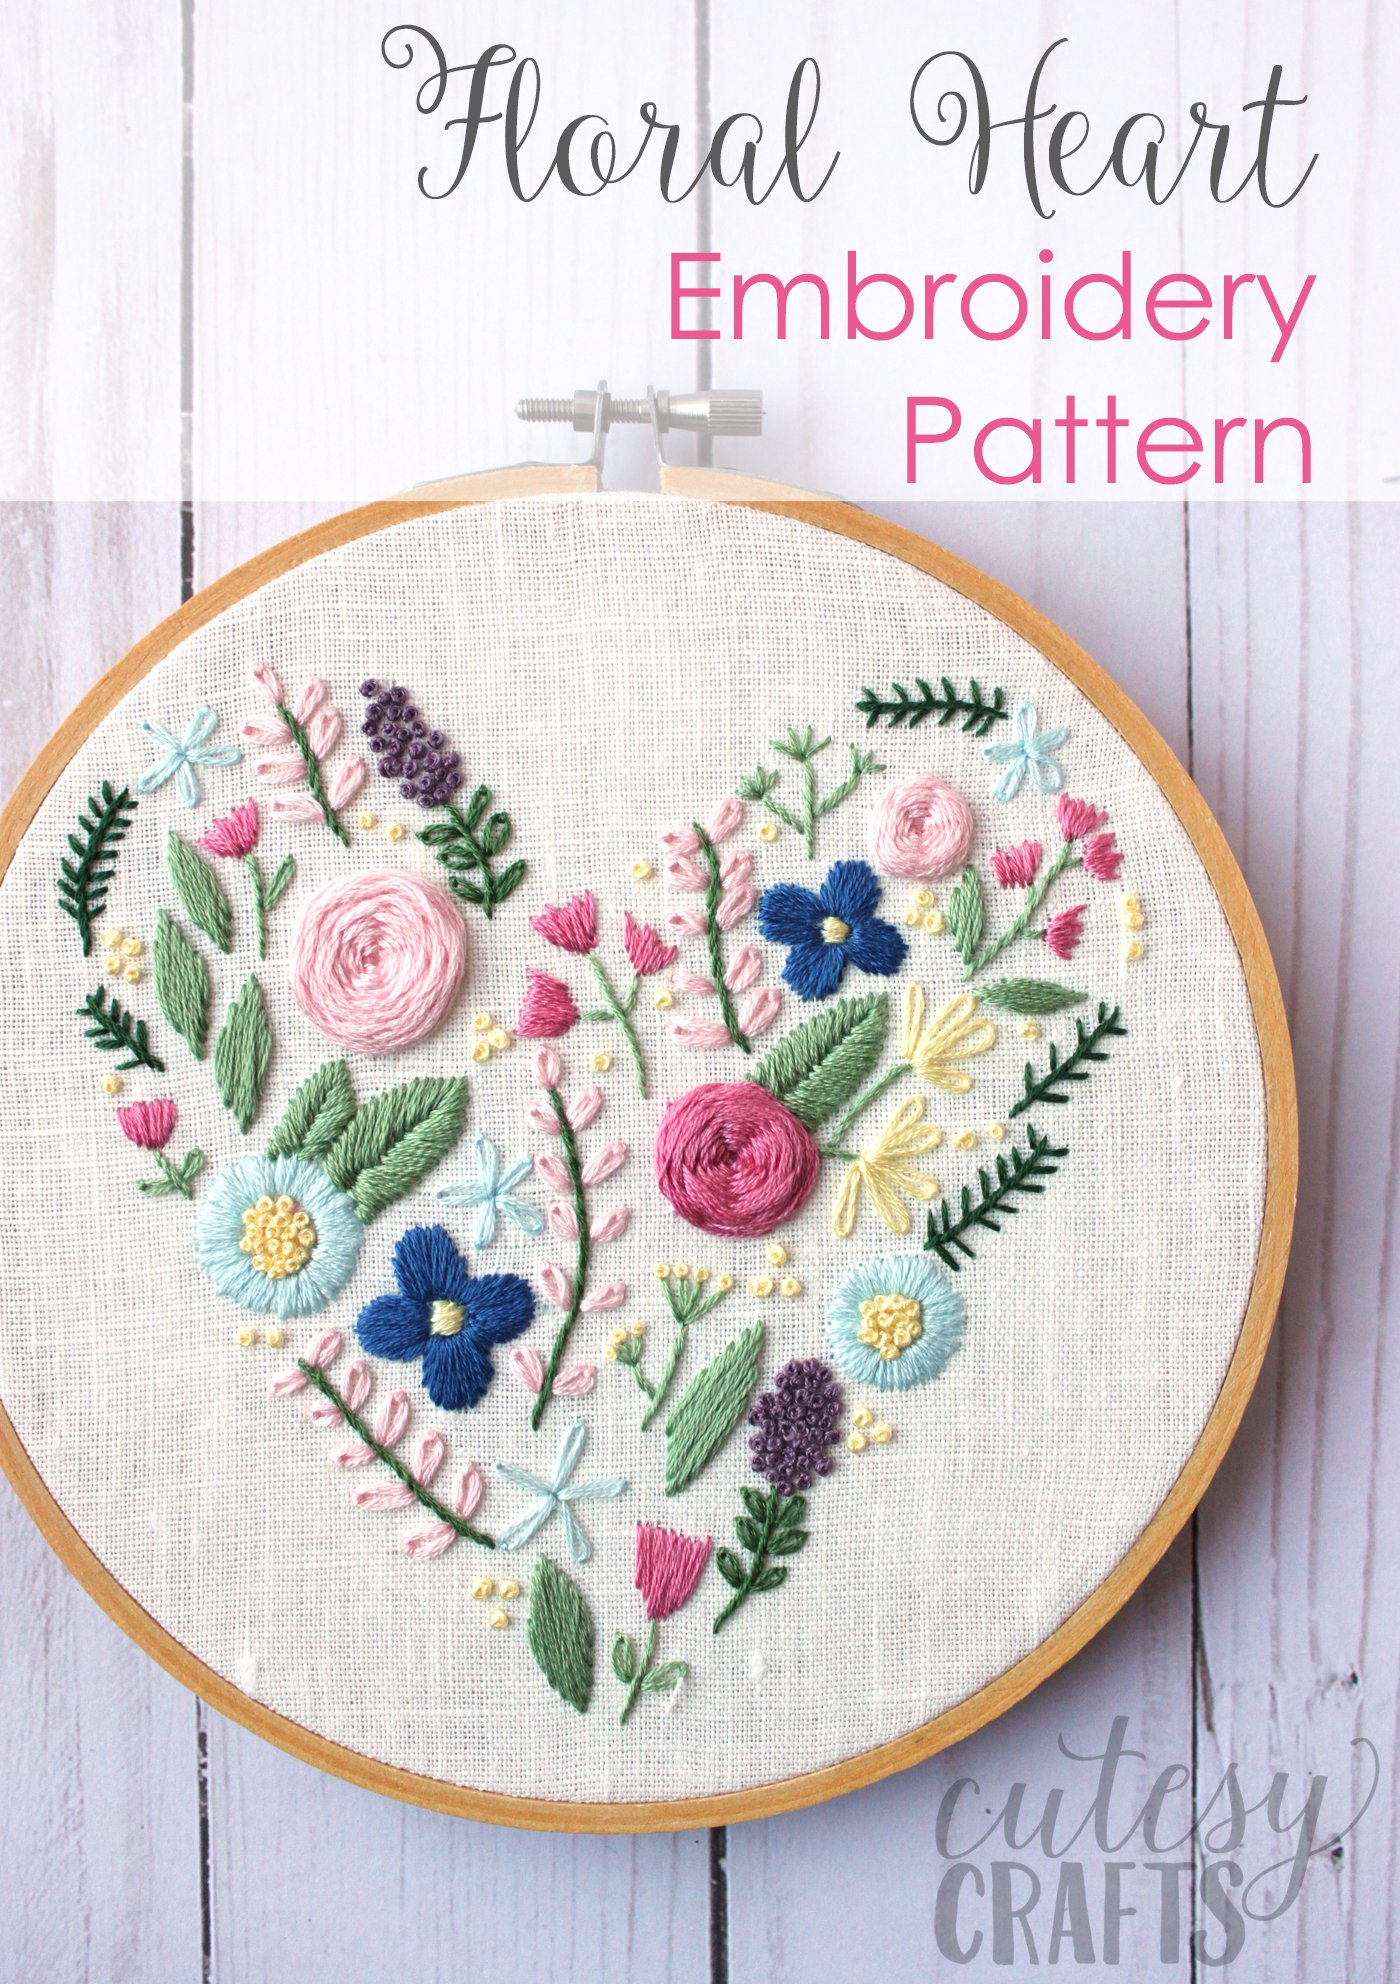 Printable Embroidery Patterns Floral Heart Hand Embroidery Pattern The Polka Dot Chair